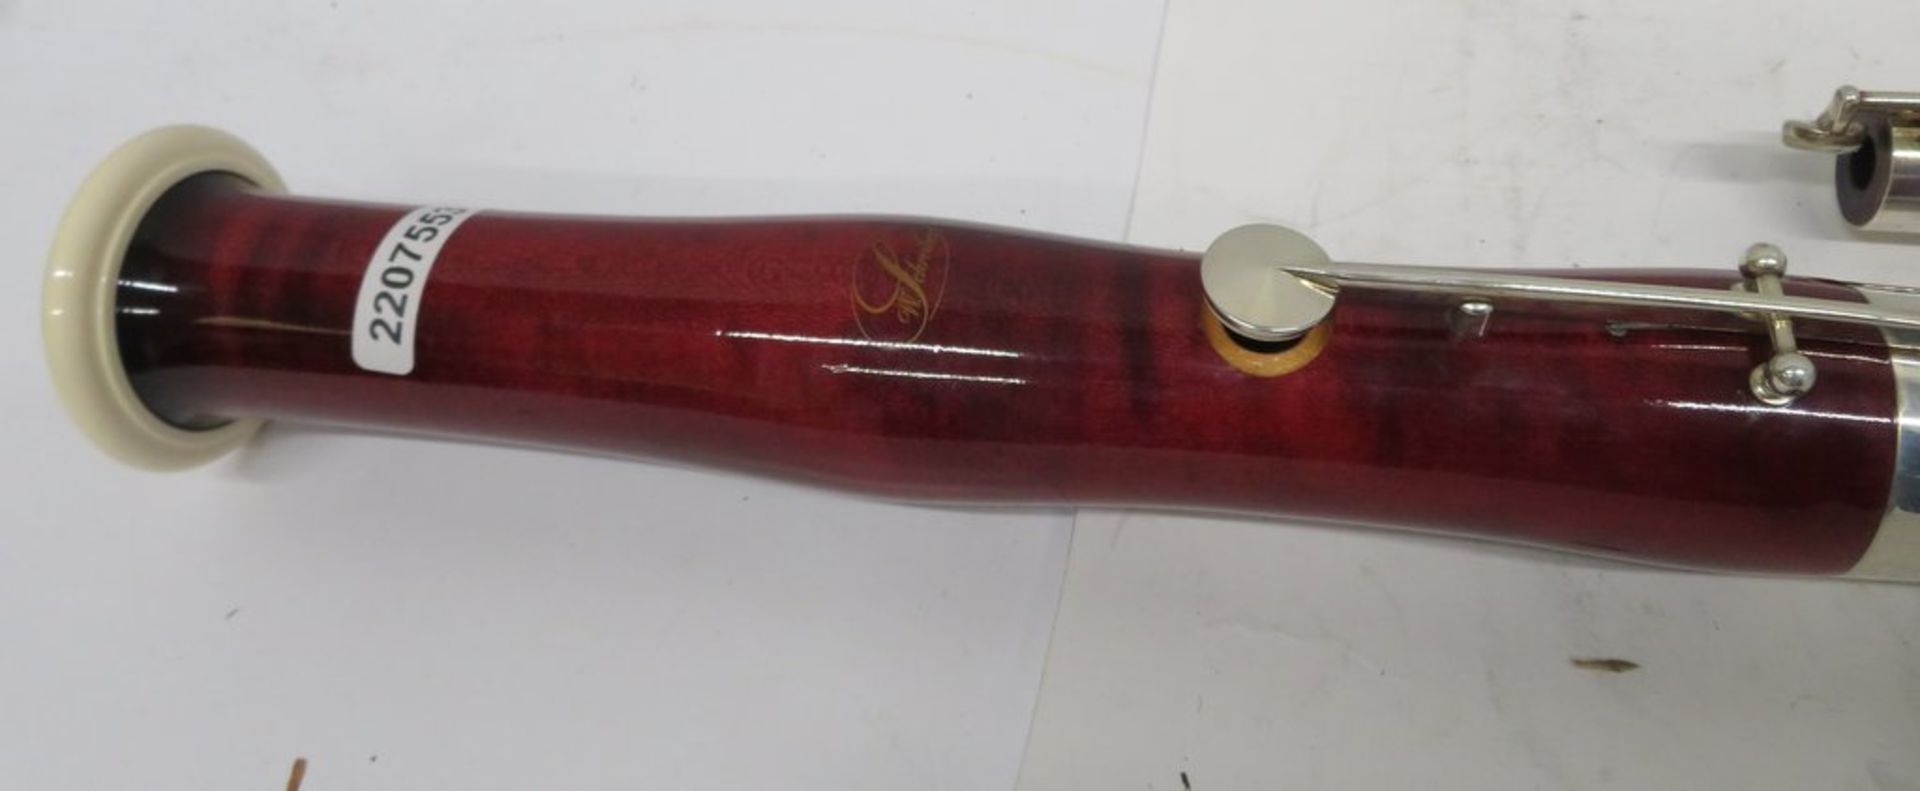 W.Schreiber S71 Bassoon With Case. Serial Number: 36306. No Crooks Included. Please Note That This - Image 11 of 17